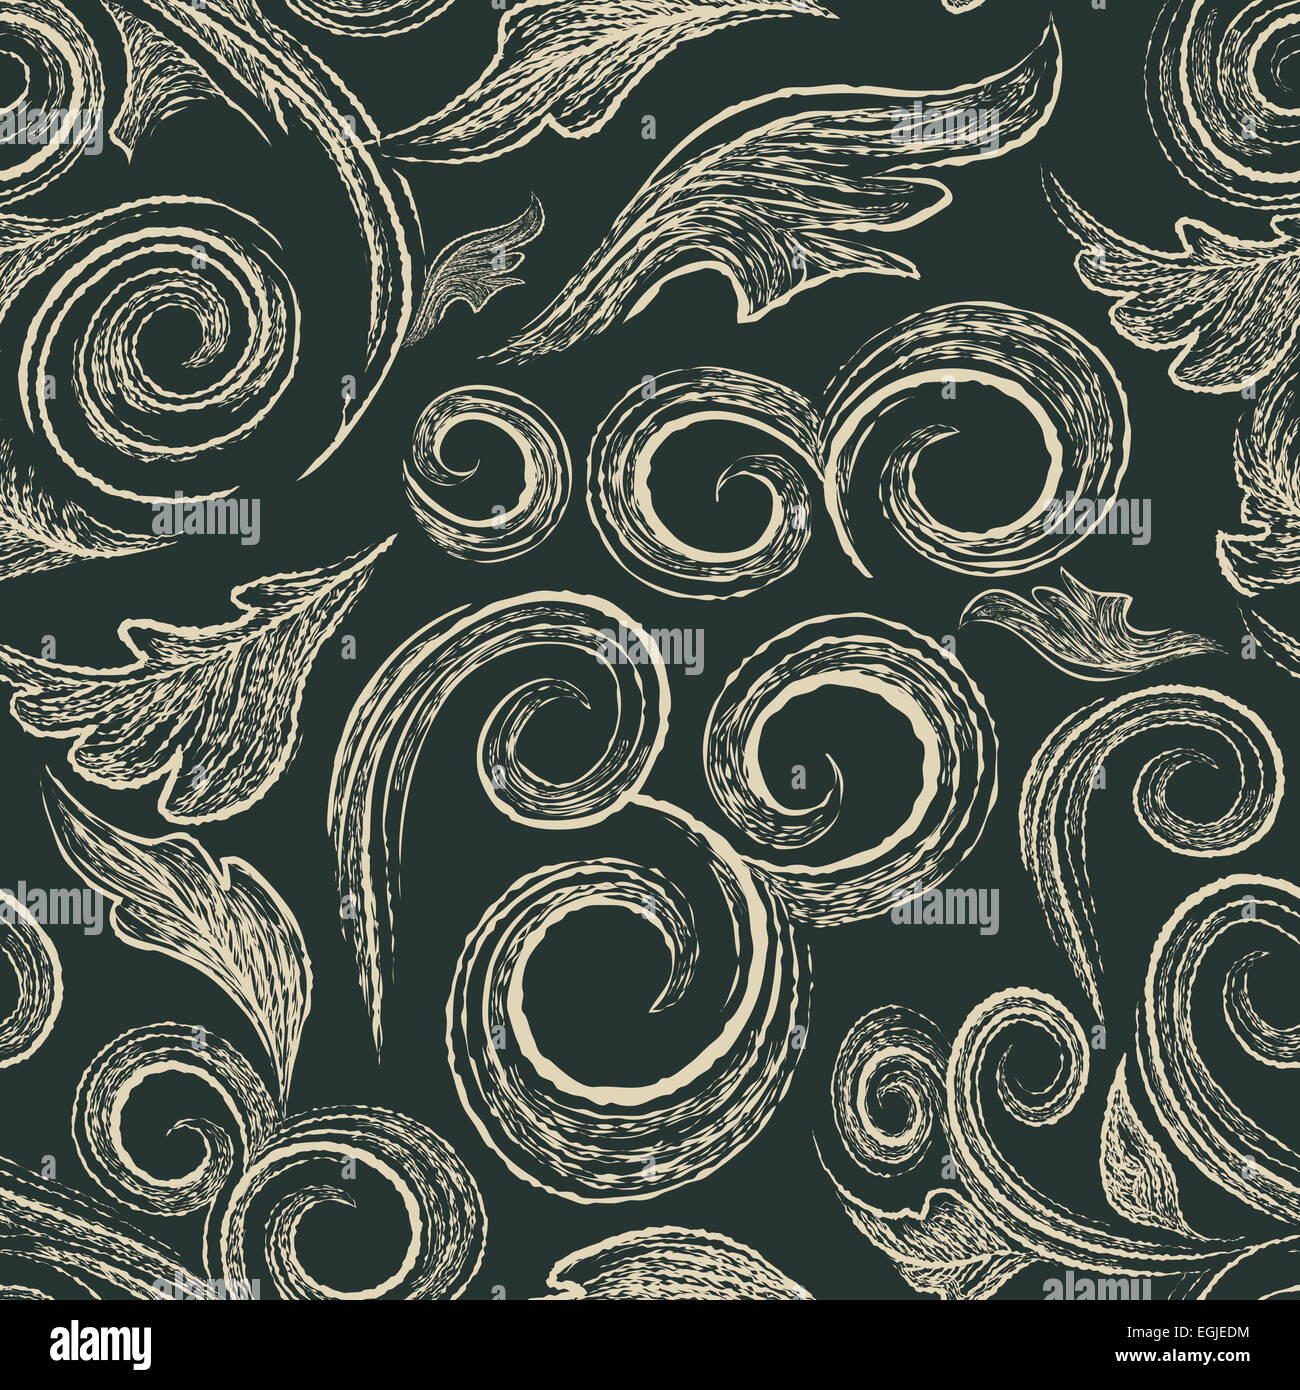 Seamless pattern with sketchbook swirls drawn in retro style. Stock Photo